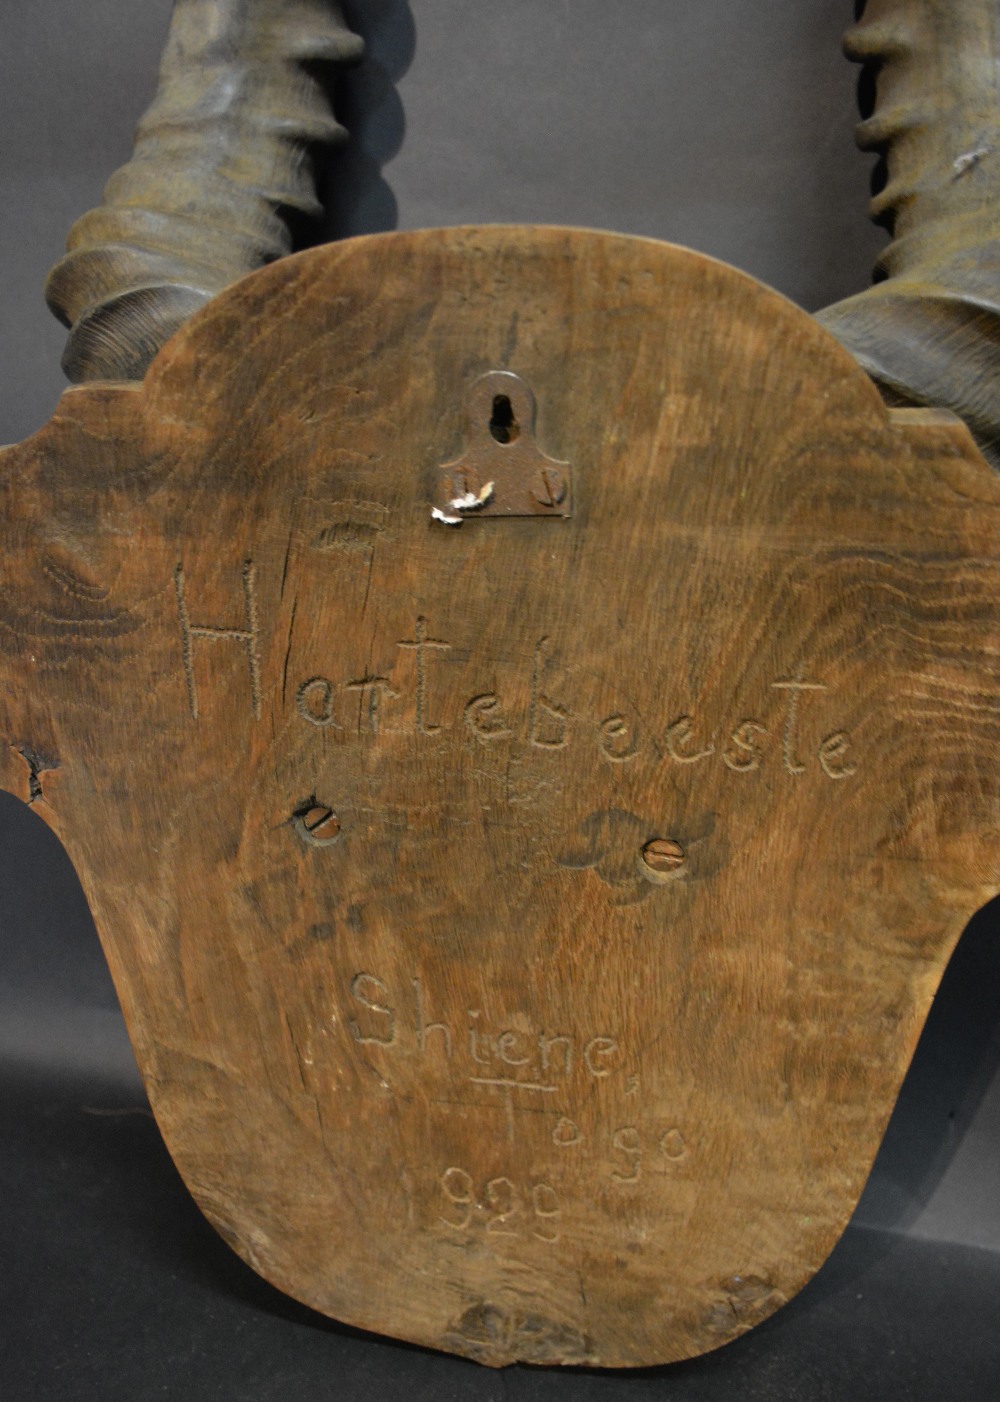 A Pair of Hartebeeste Horns and Skull mounted on an oak shield with inscription Heiene Togo 1929, - Image 2 of 2